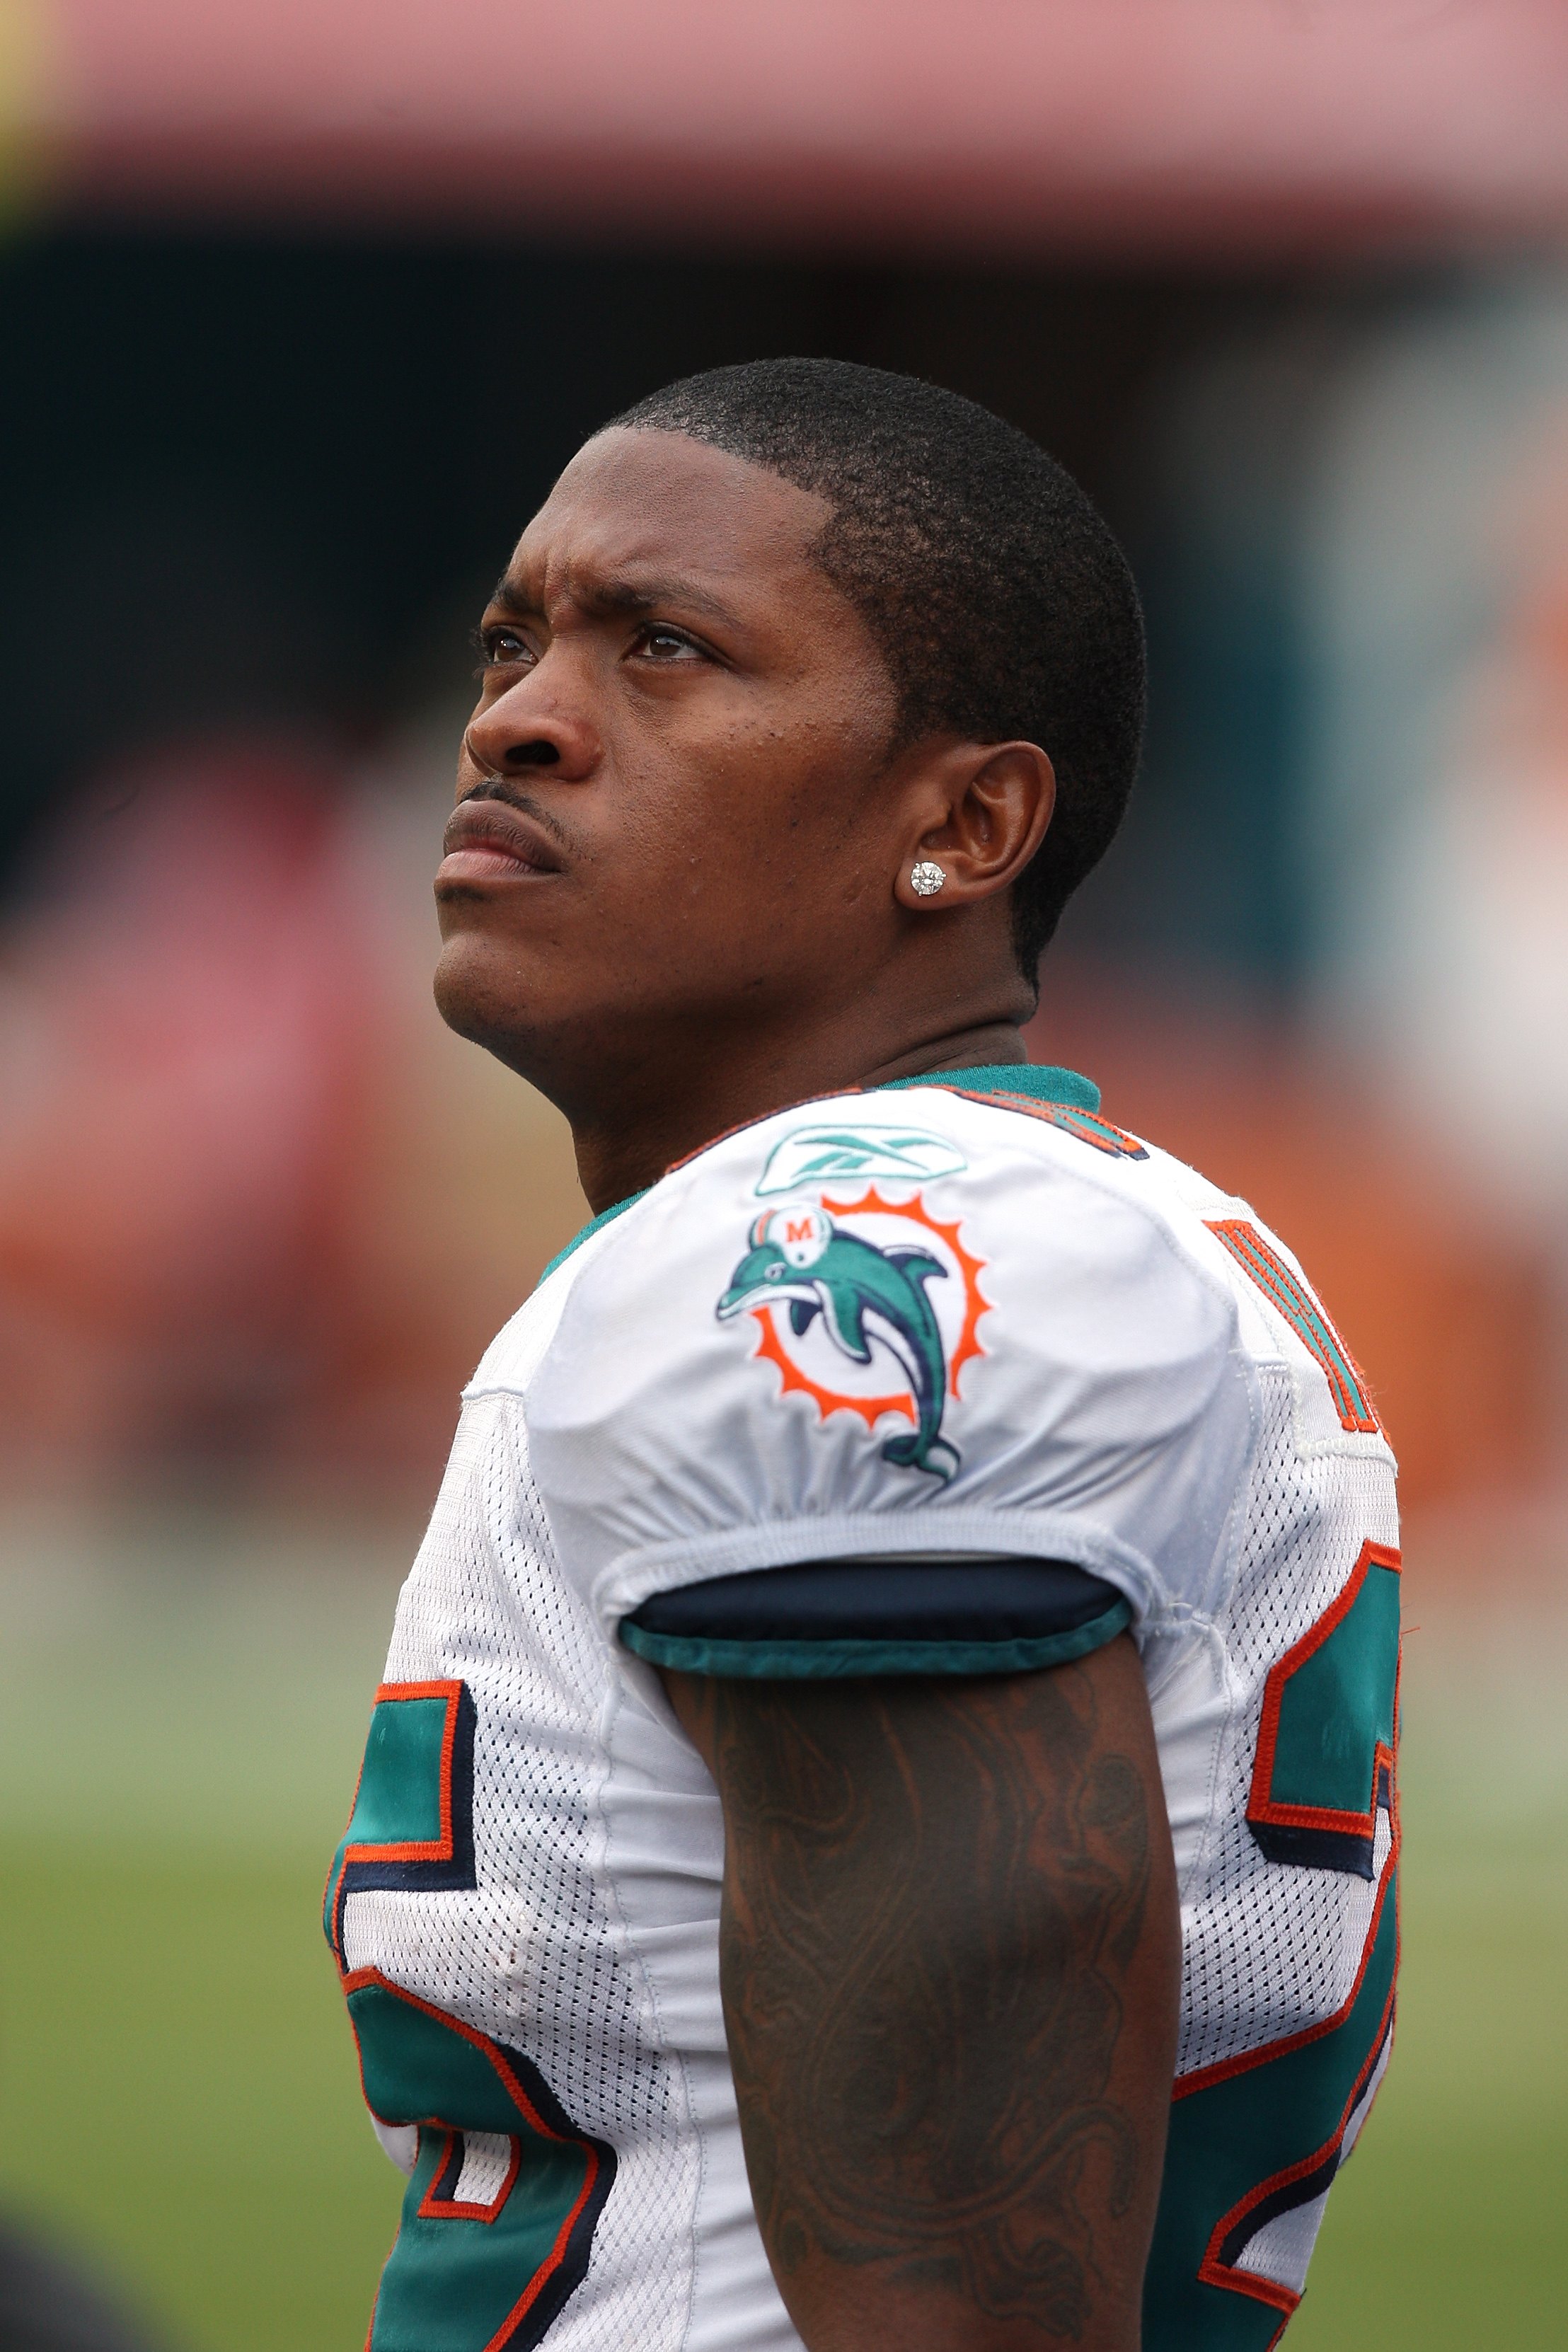 Will Allen of the Miami Dolphins in 2008. (Joe Robbins—Getty Images)